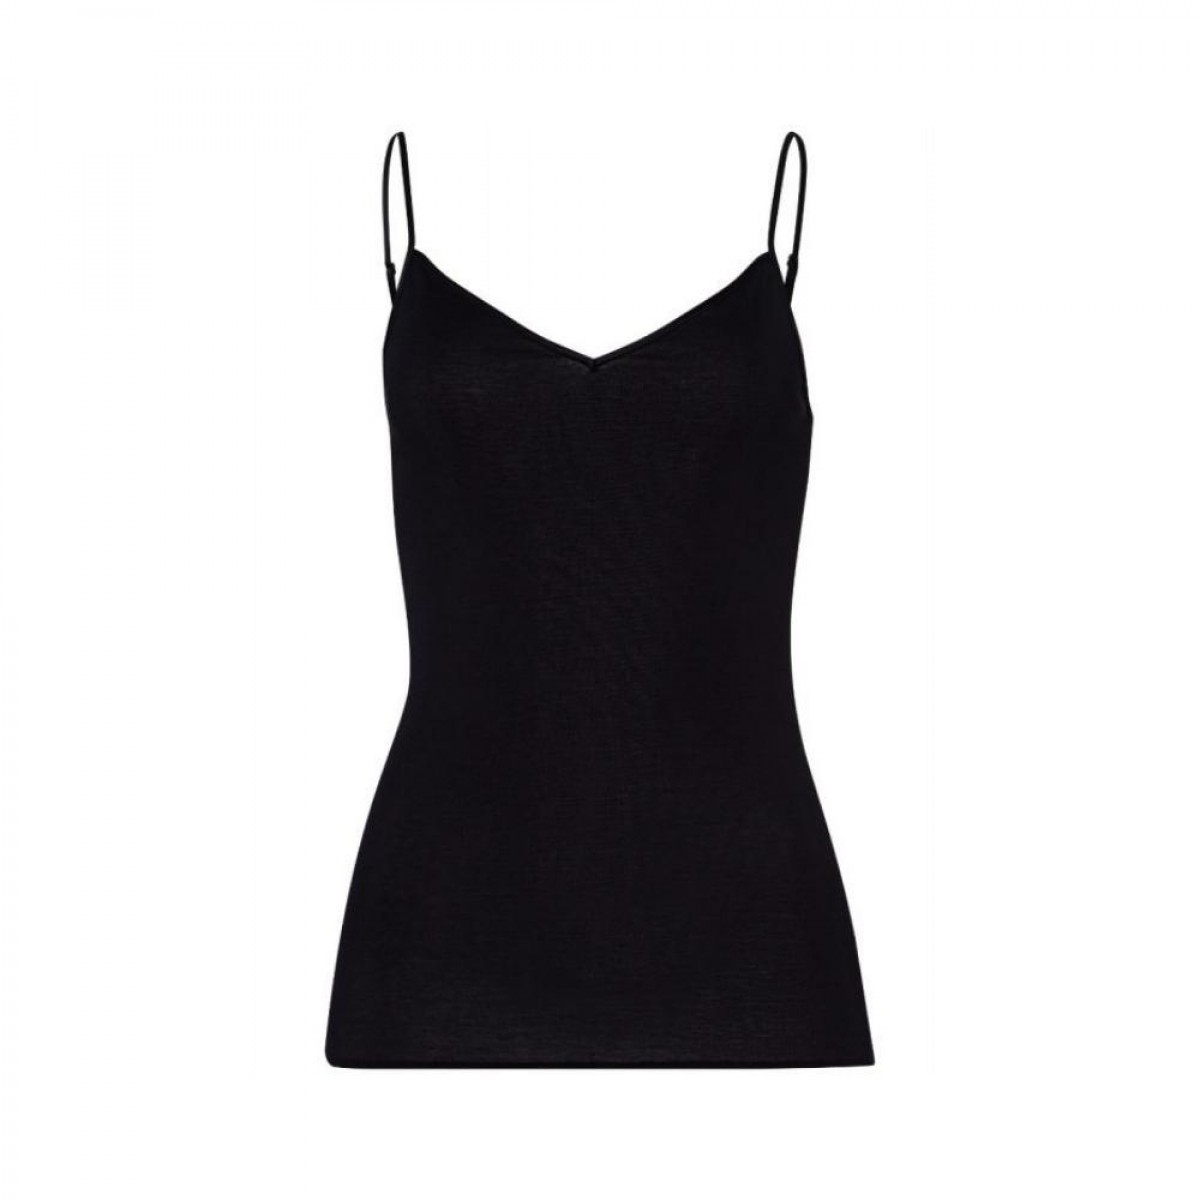 cotton seamless top - black - front